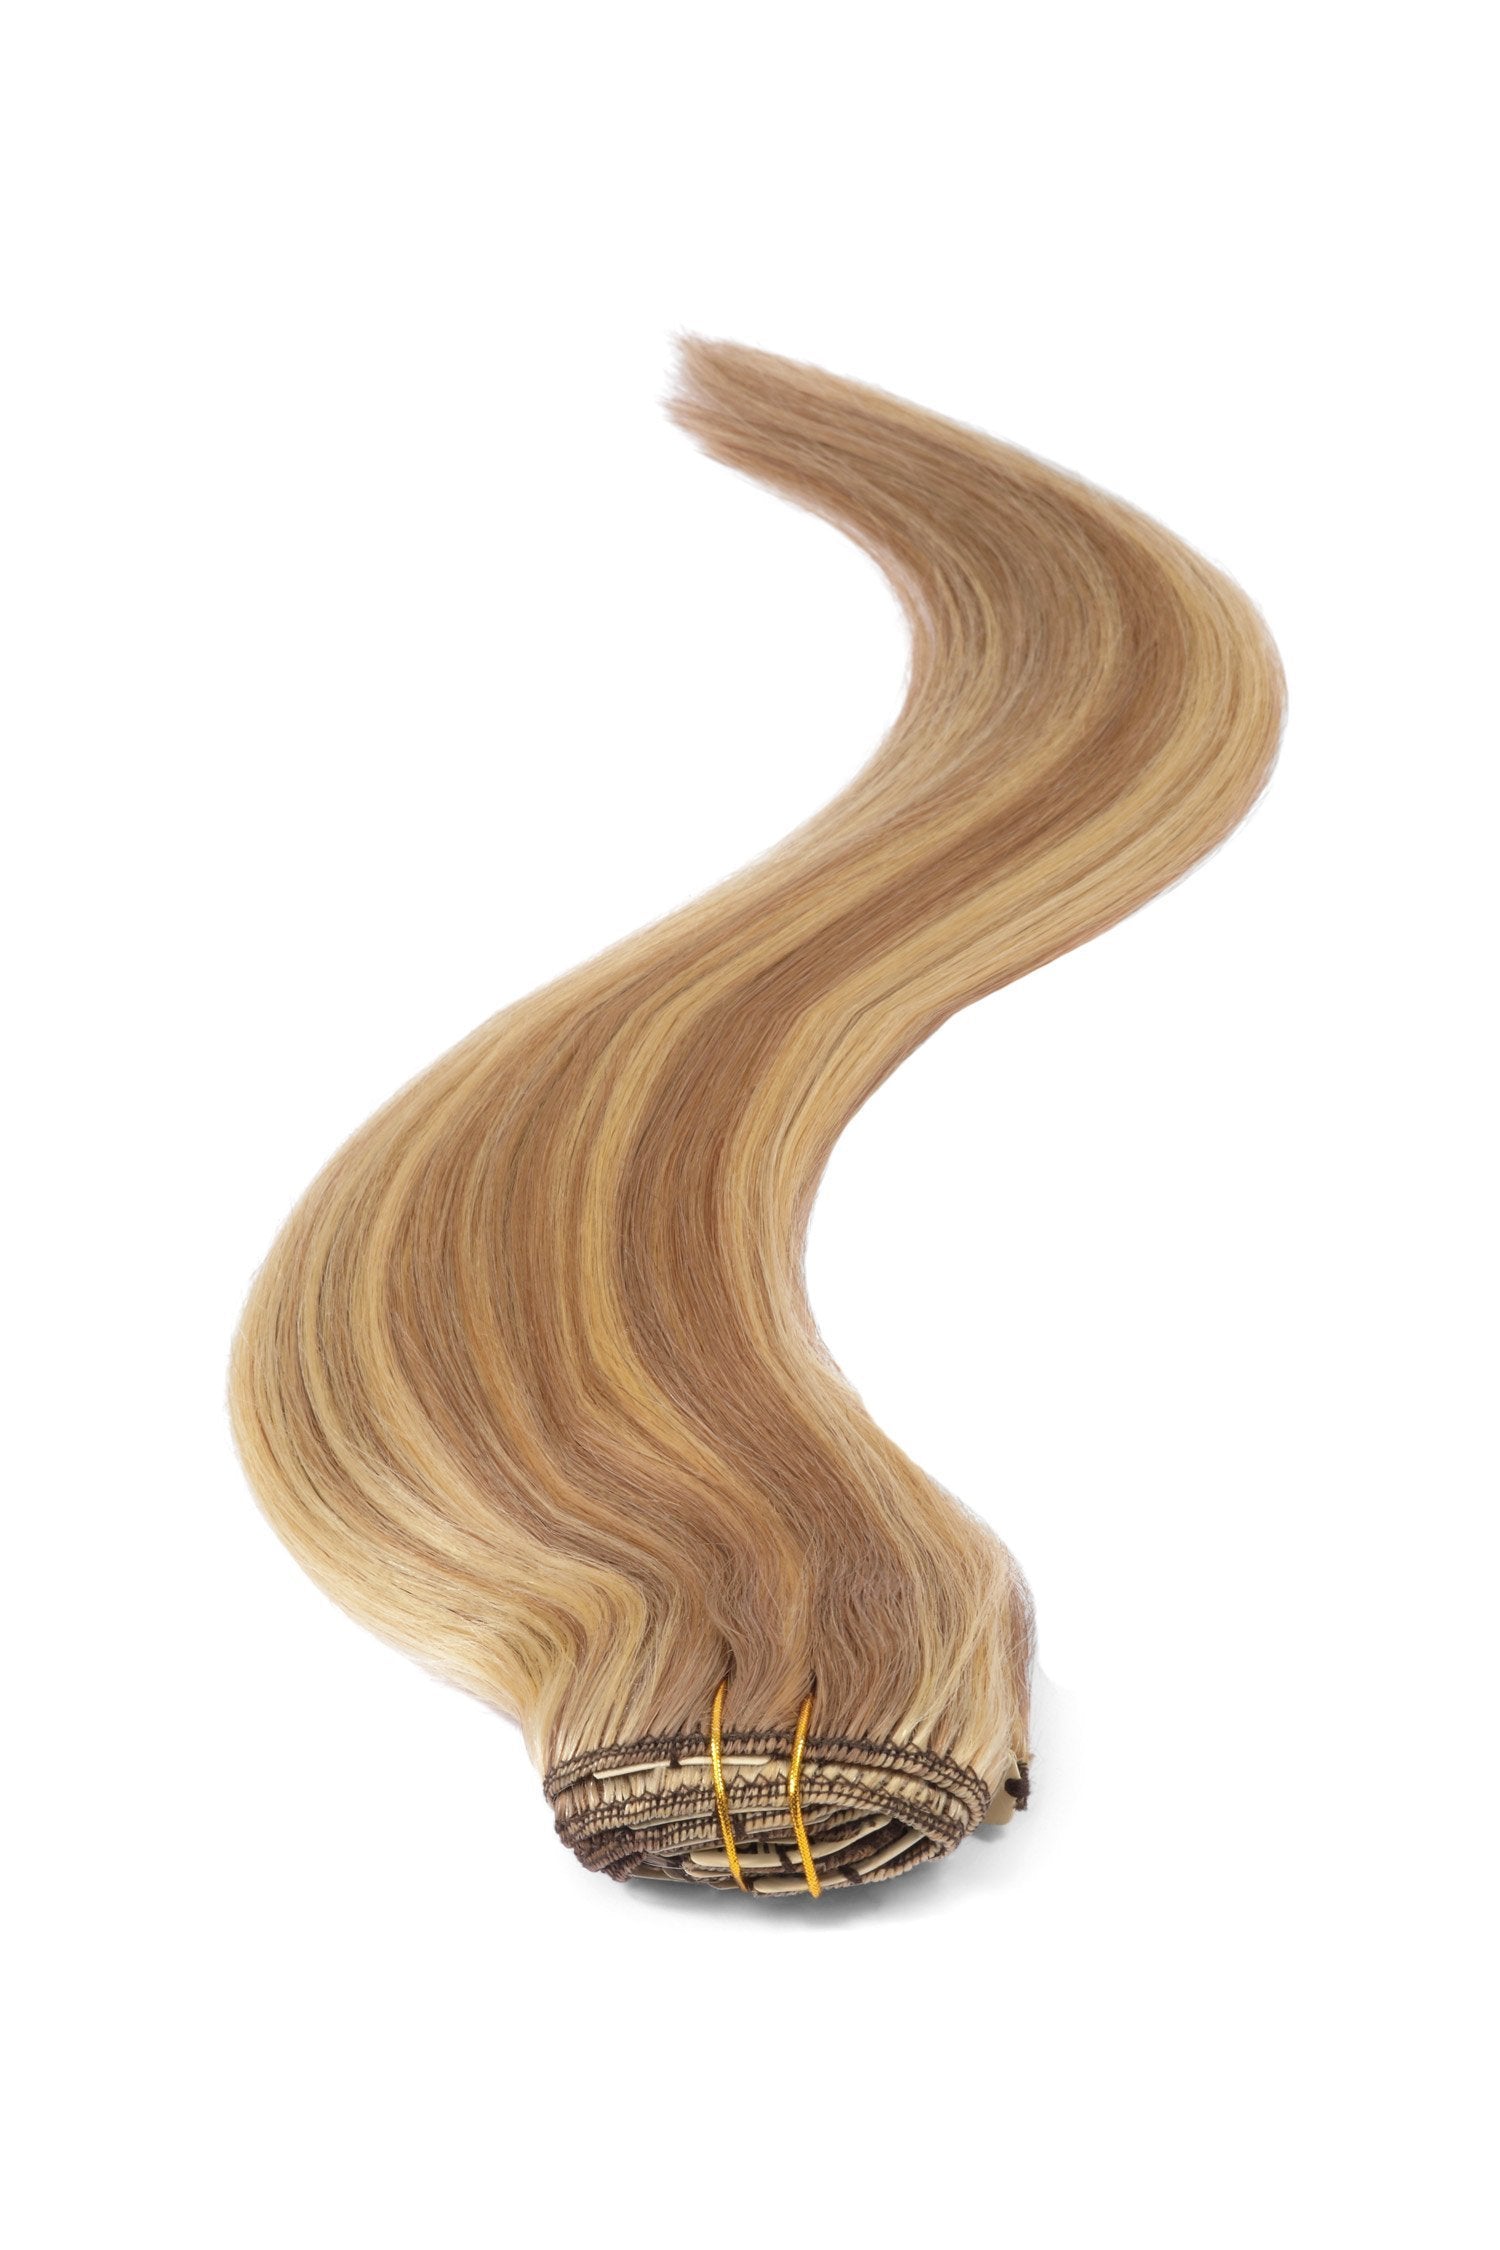 Full Head | Clip in Hair | 18 inch| Brown and Blonde 8/24 - Beauty Hair Products LtdHair Extensions